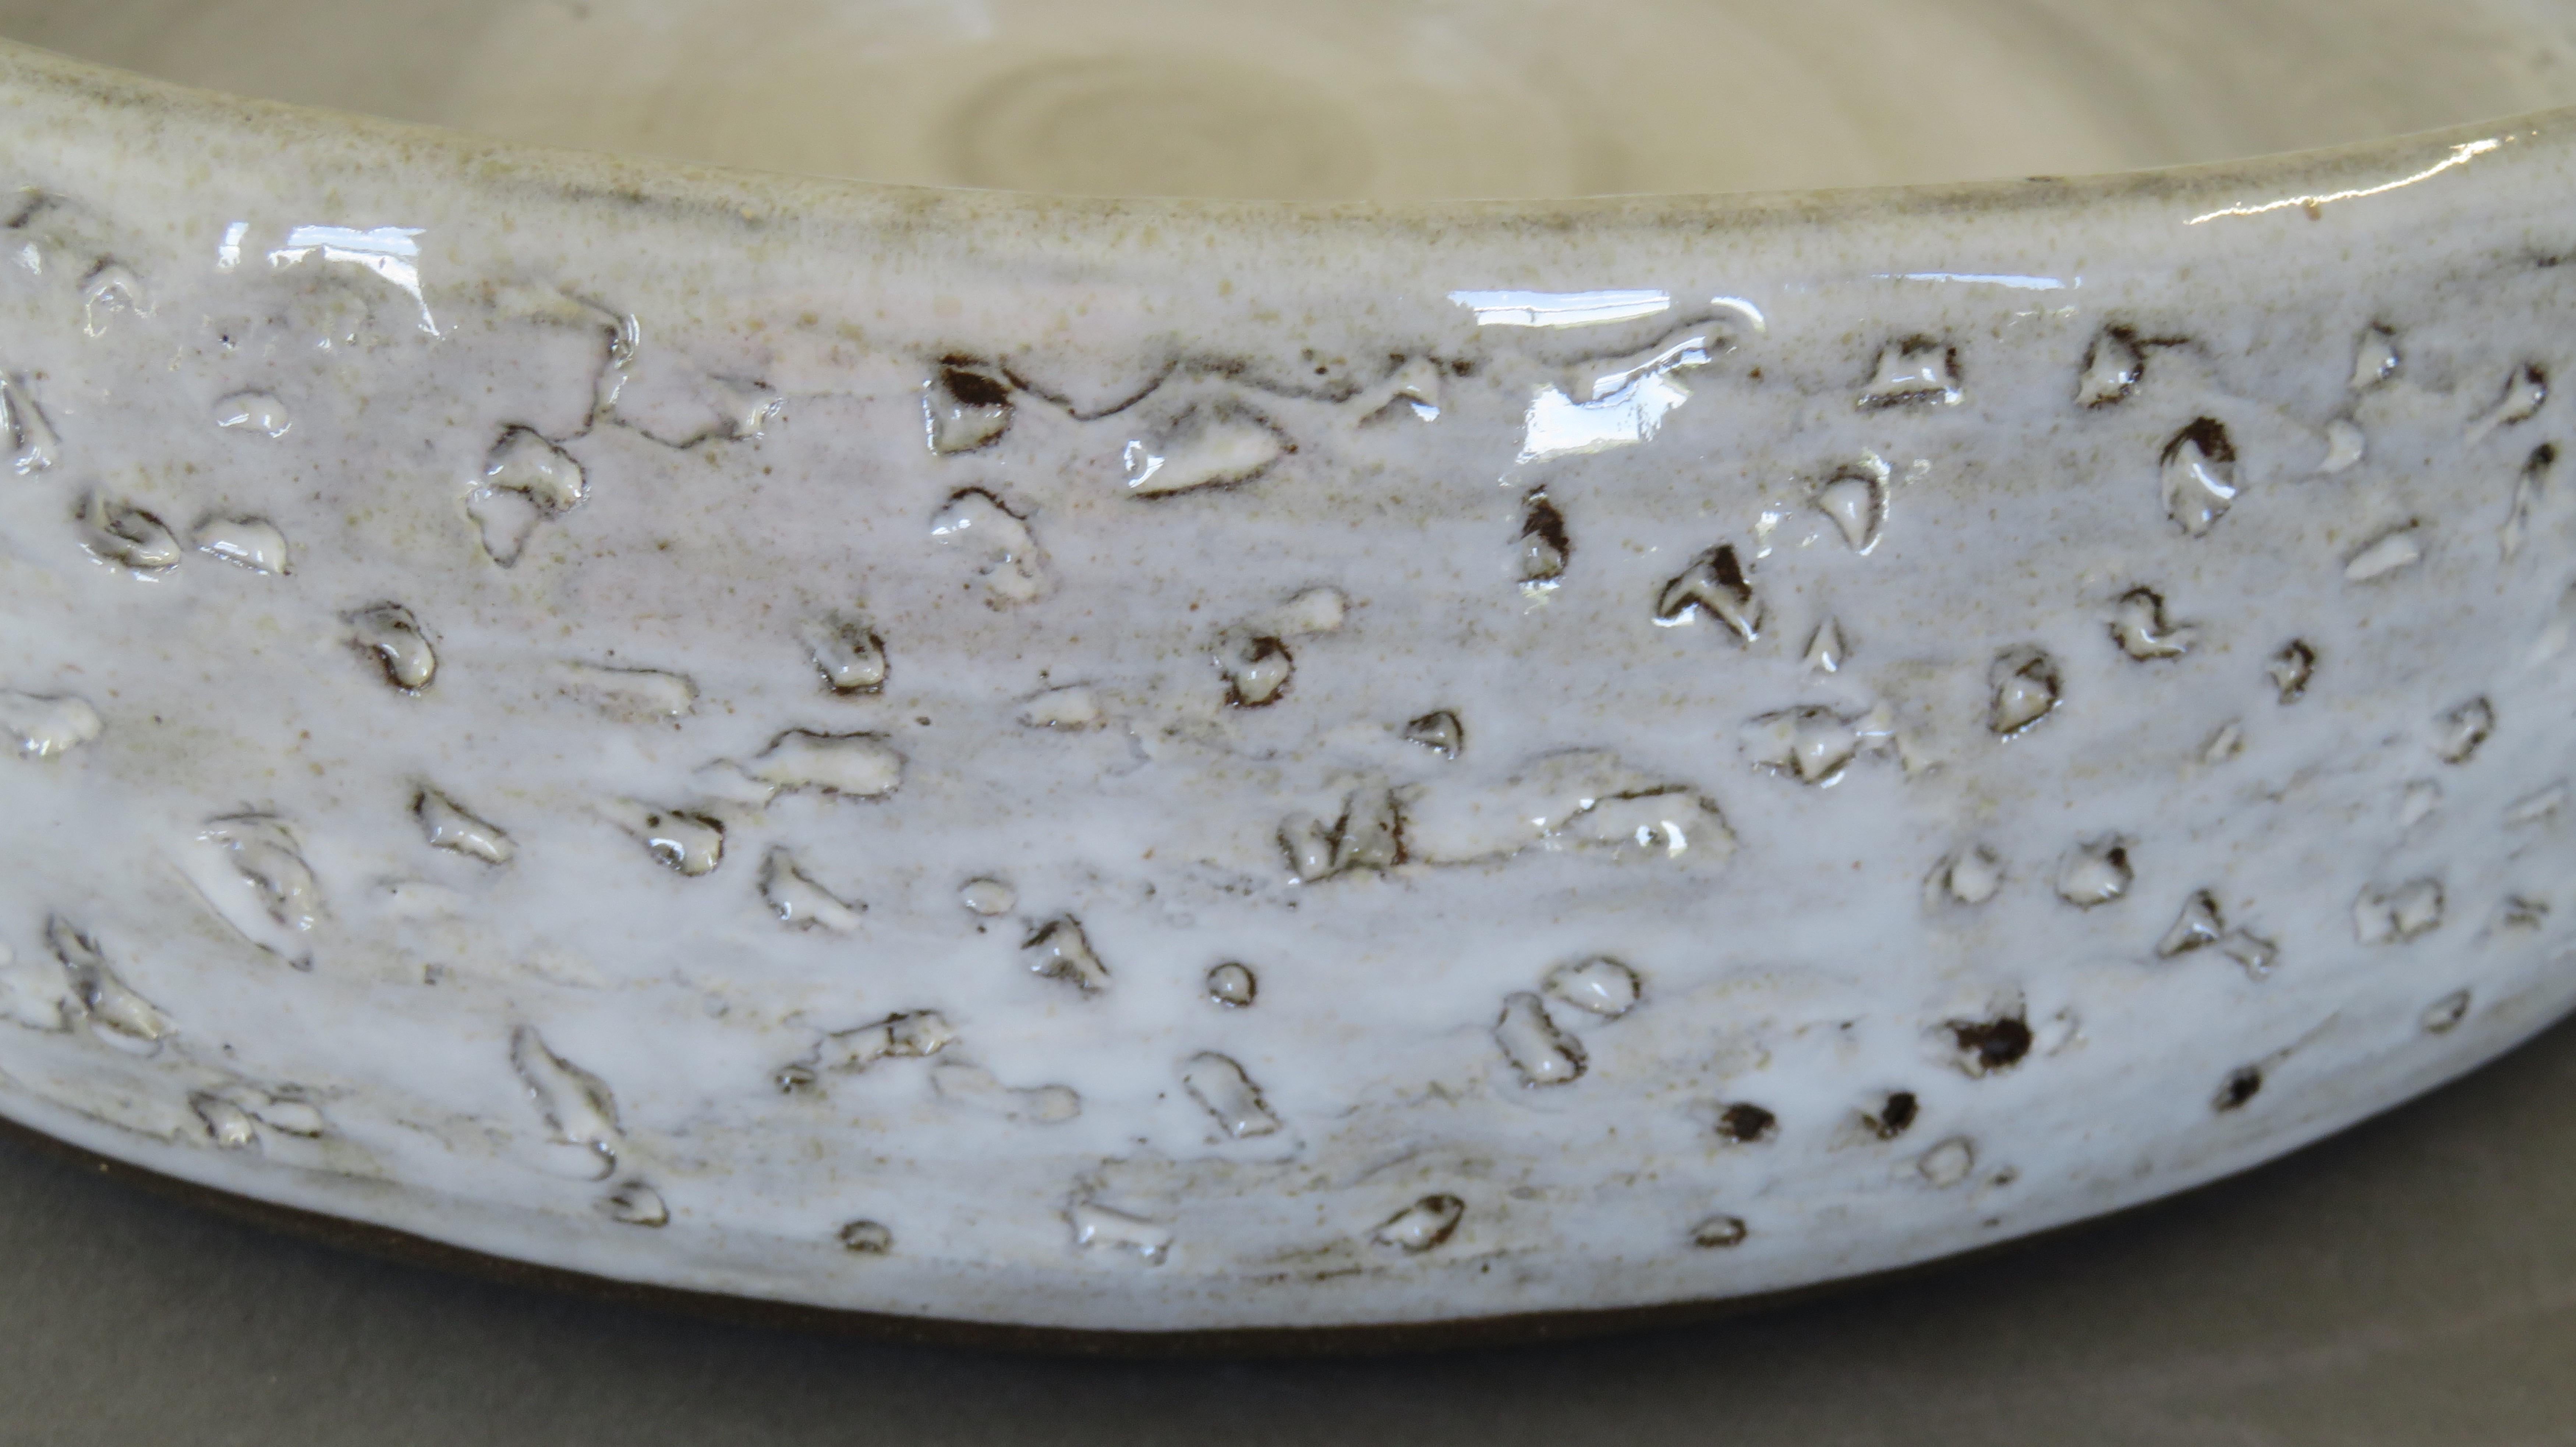 Hand-Carved Large Low Serving Bowl, Carved Exterior with White Glaze, Hand Built Ceramic